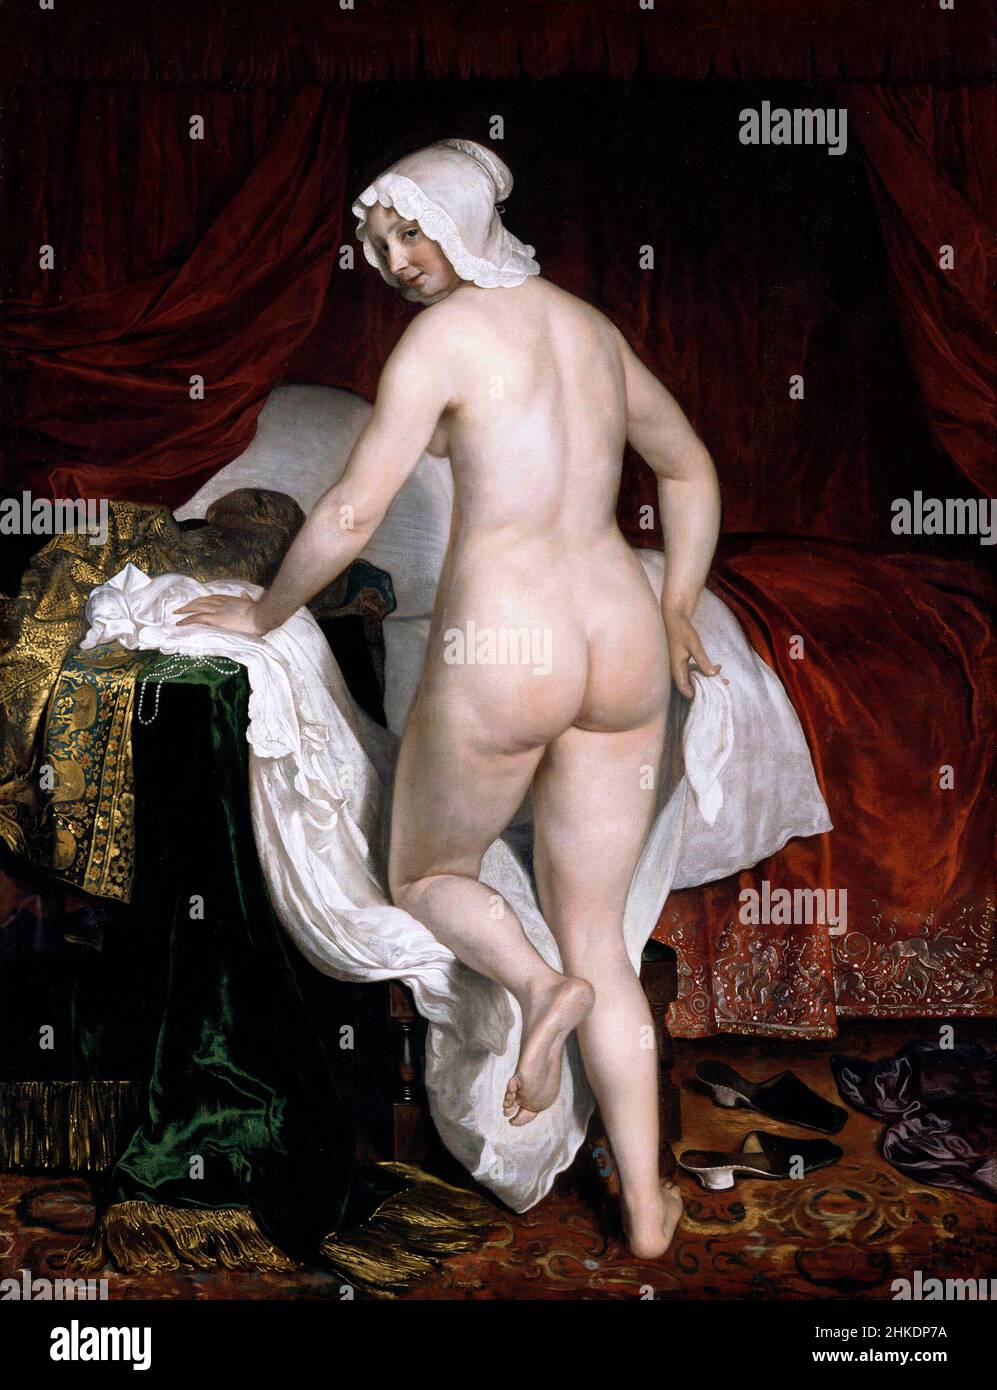 Young Woman Going to Bed - Jacob van Loo Stock Photo